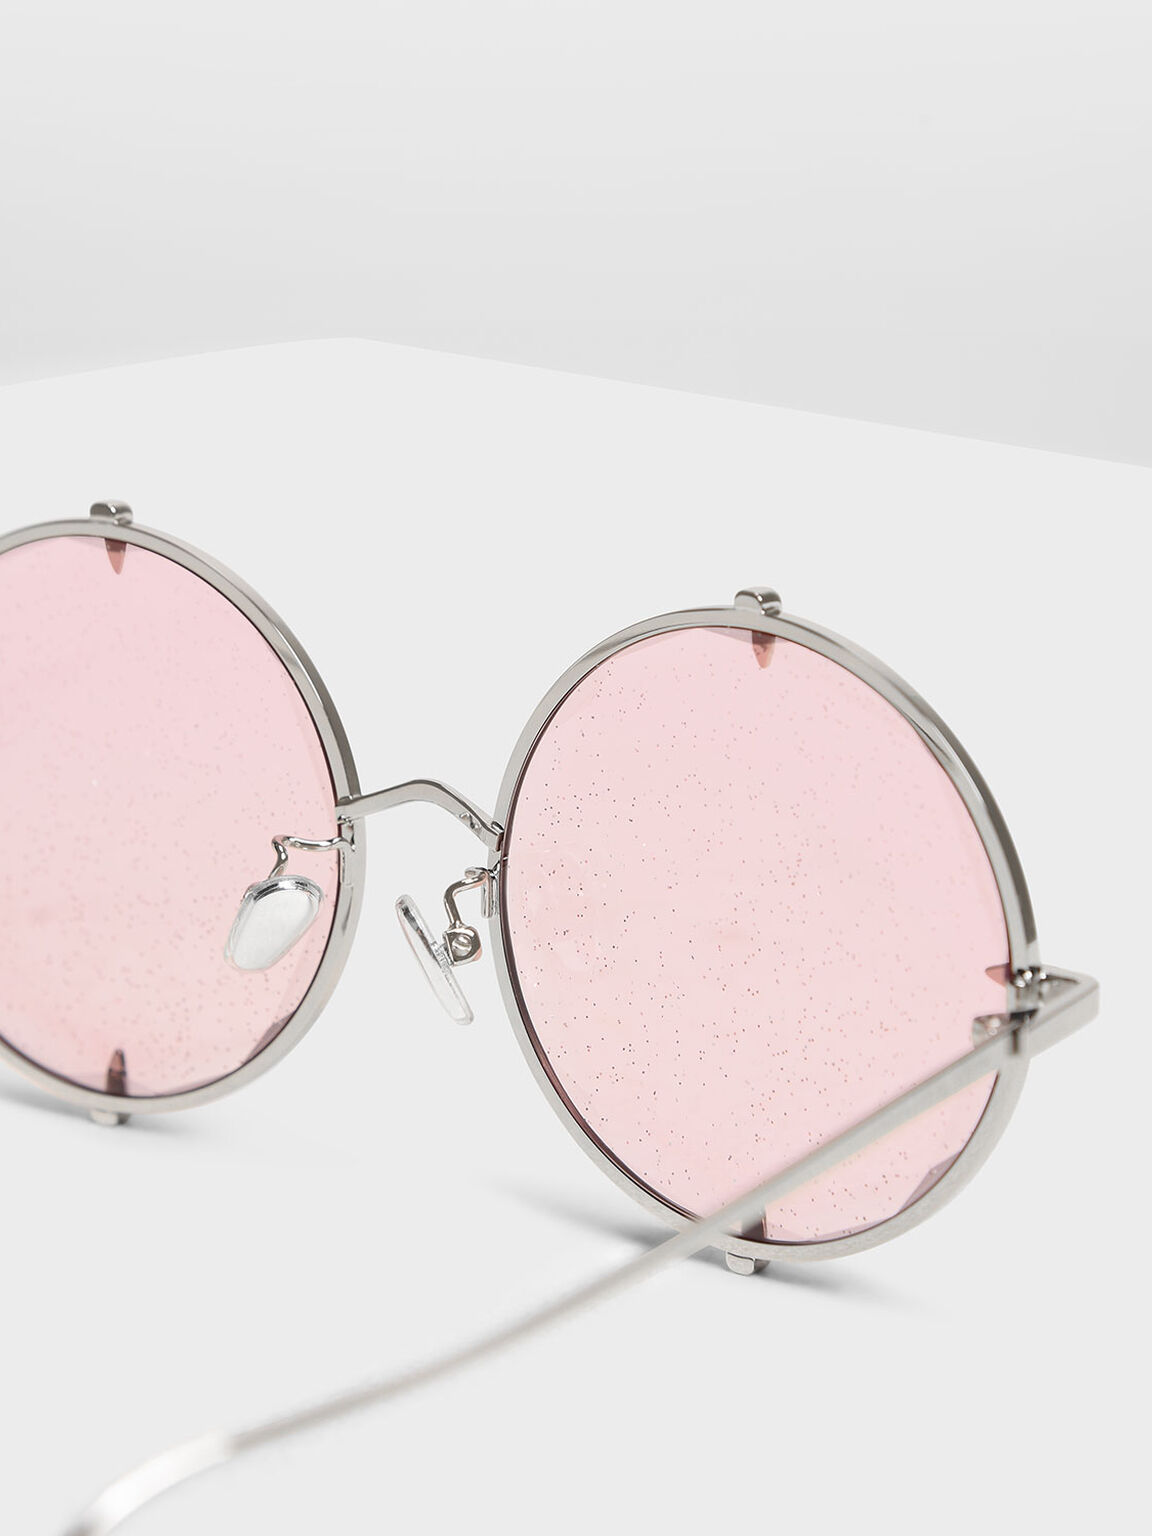 Round Wire Frame Skinny Sunglasses, Pink, hi-res